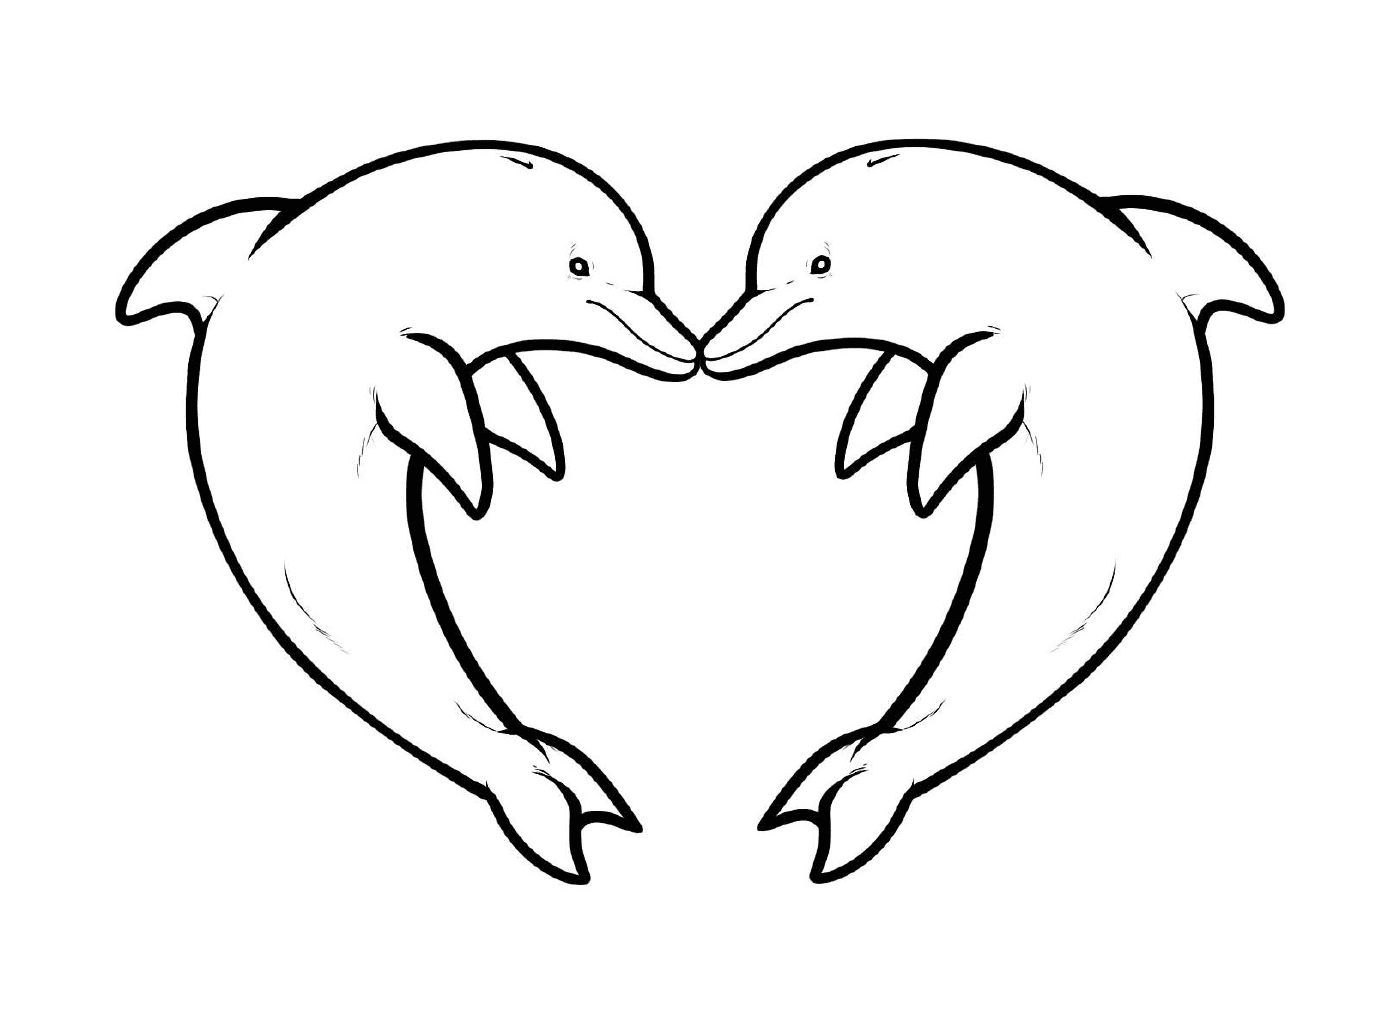  Two dolphins forming a heart 